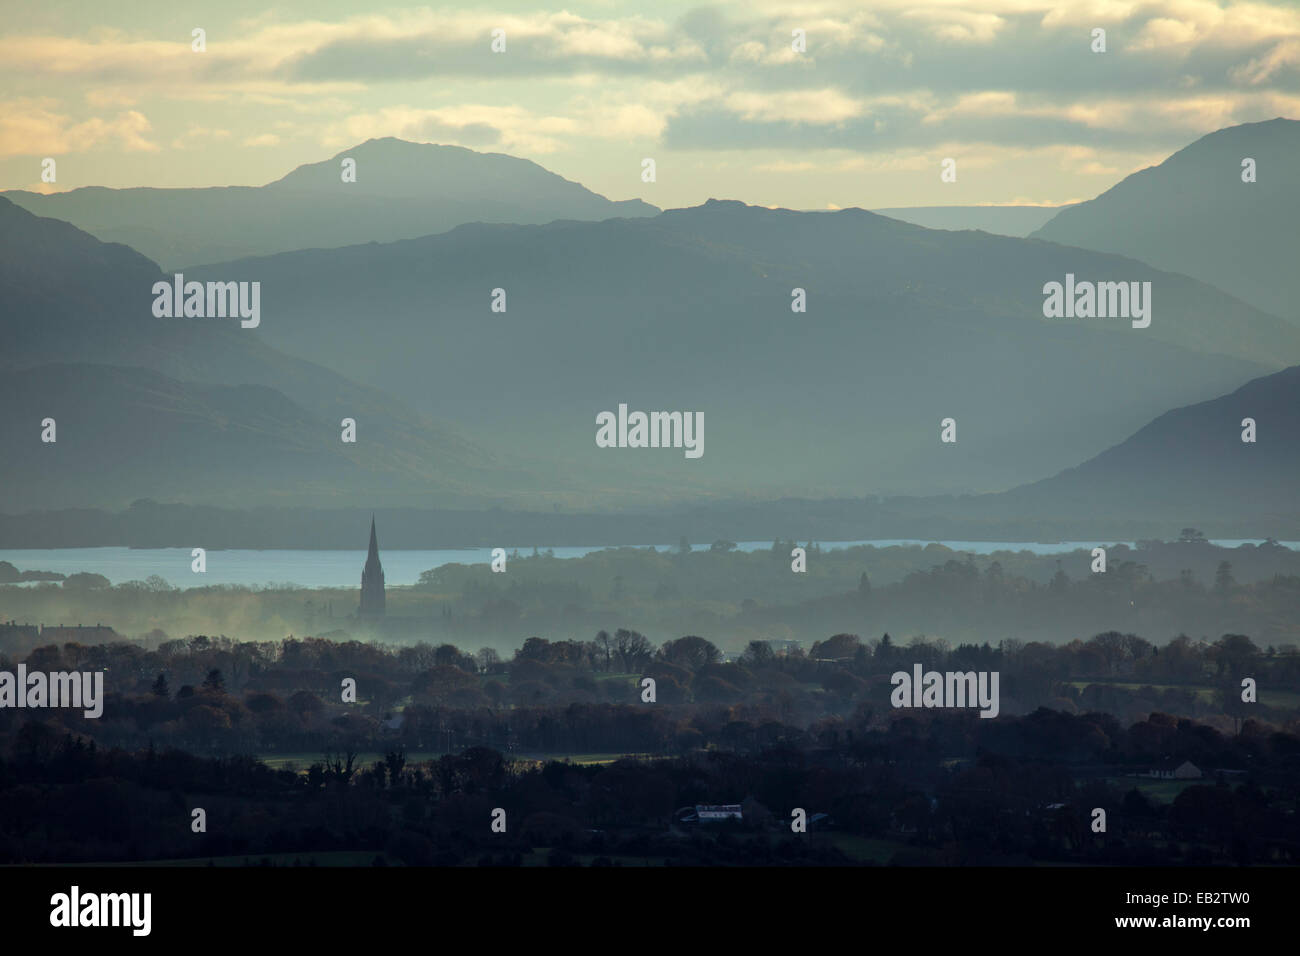 Morning mist over Killarney and the Magillycuddys Reeks, County Kerry, Ireland. Stock Photo